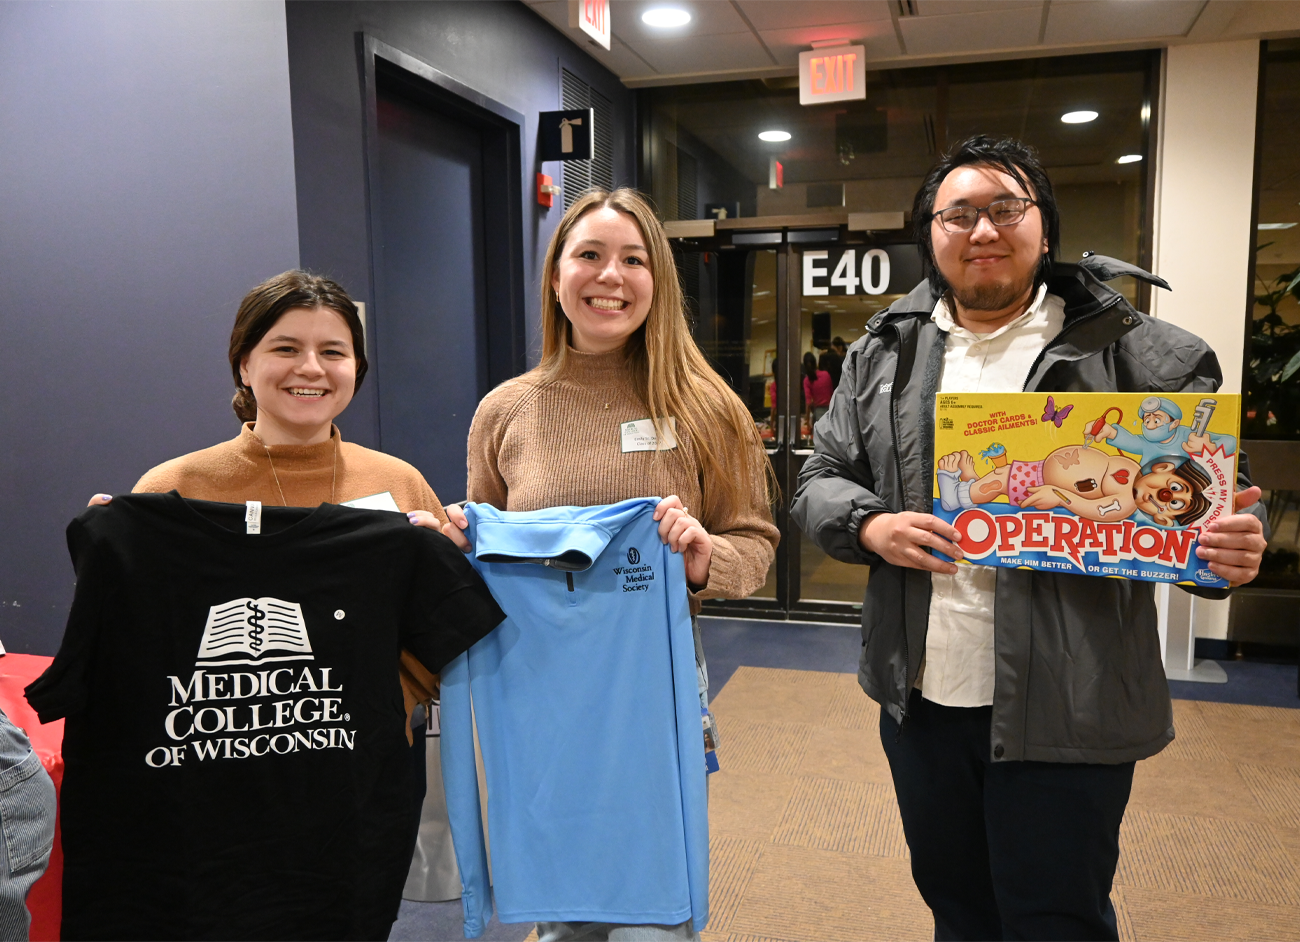 group of 3 students holding MCW shirt, WisMed sweater, and Operation game